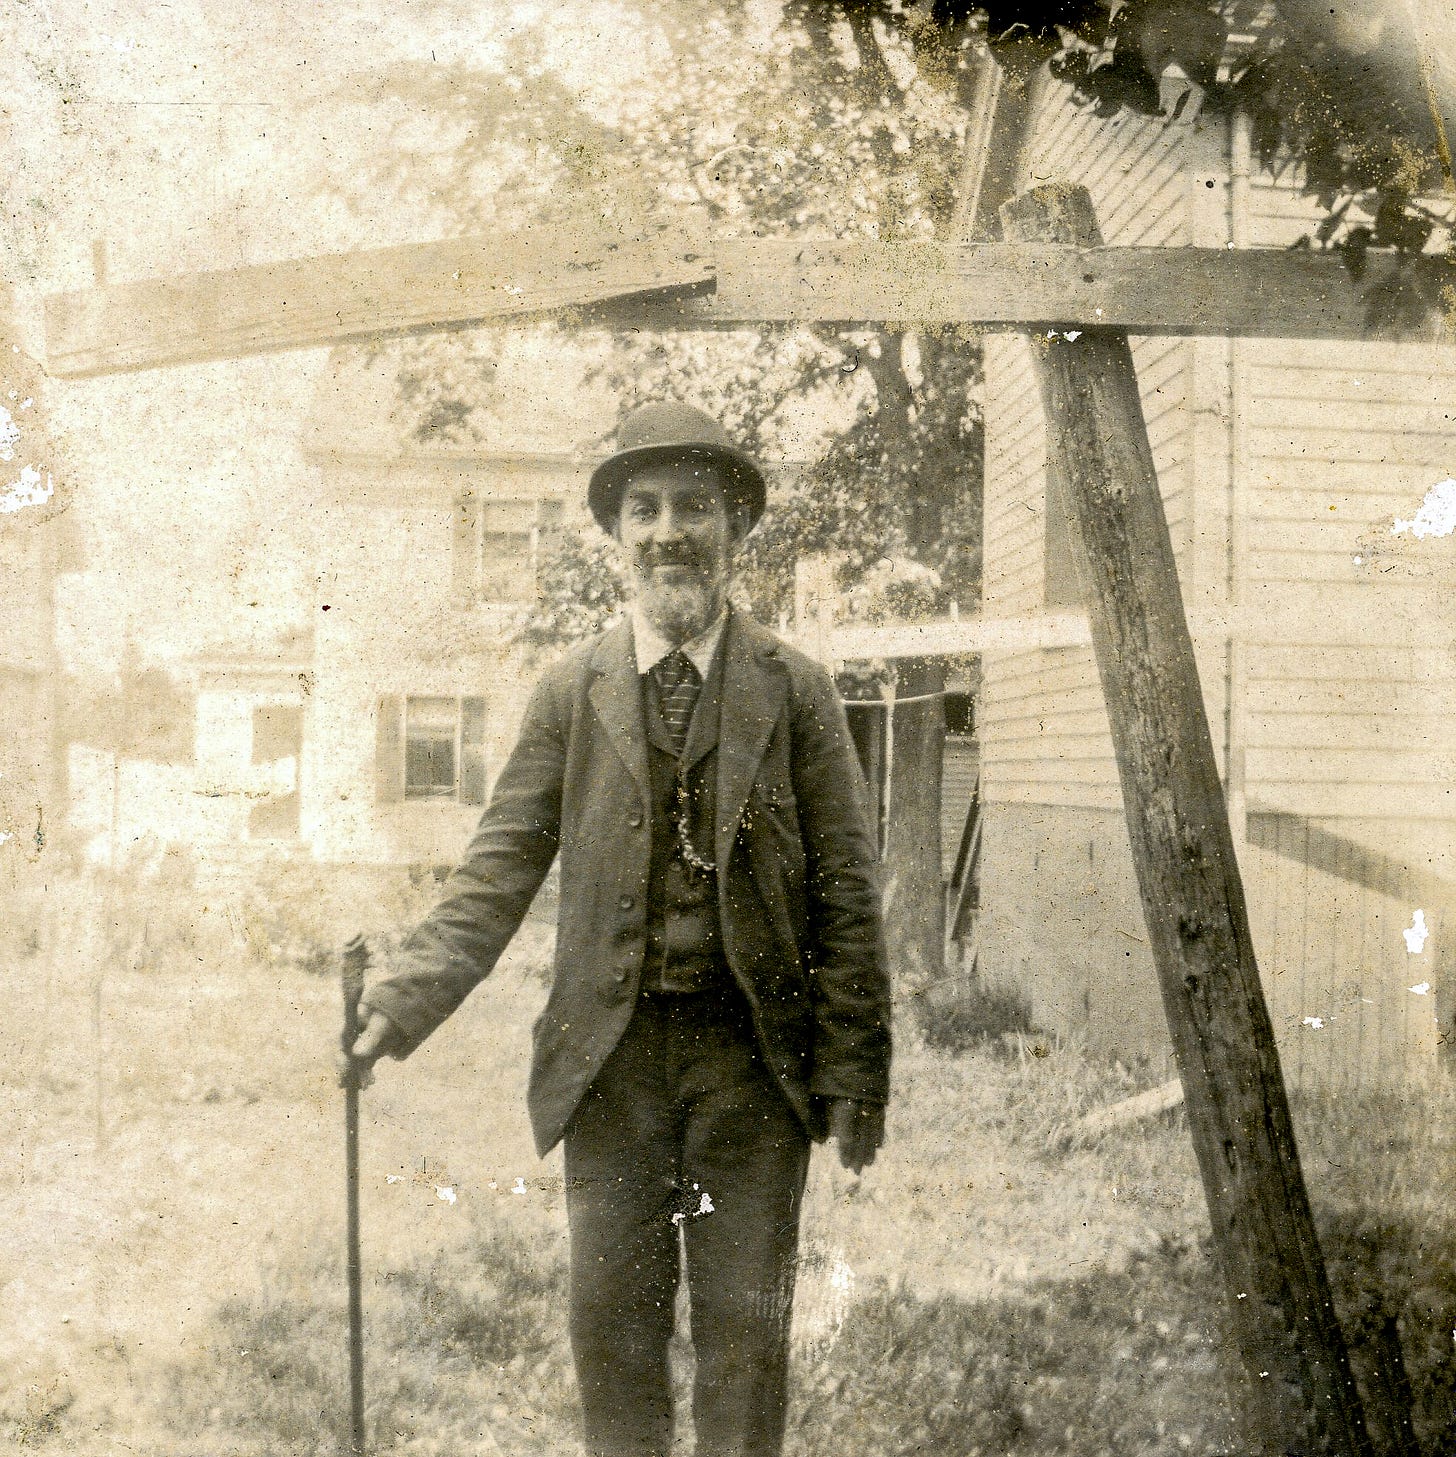 Man with hat and walking stick